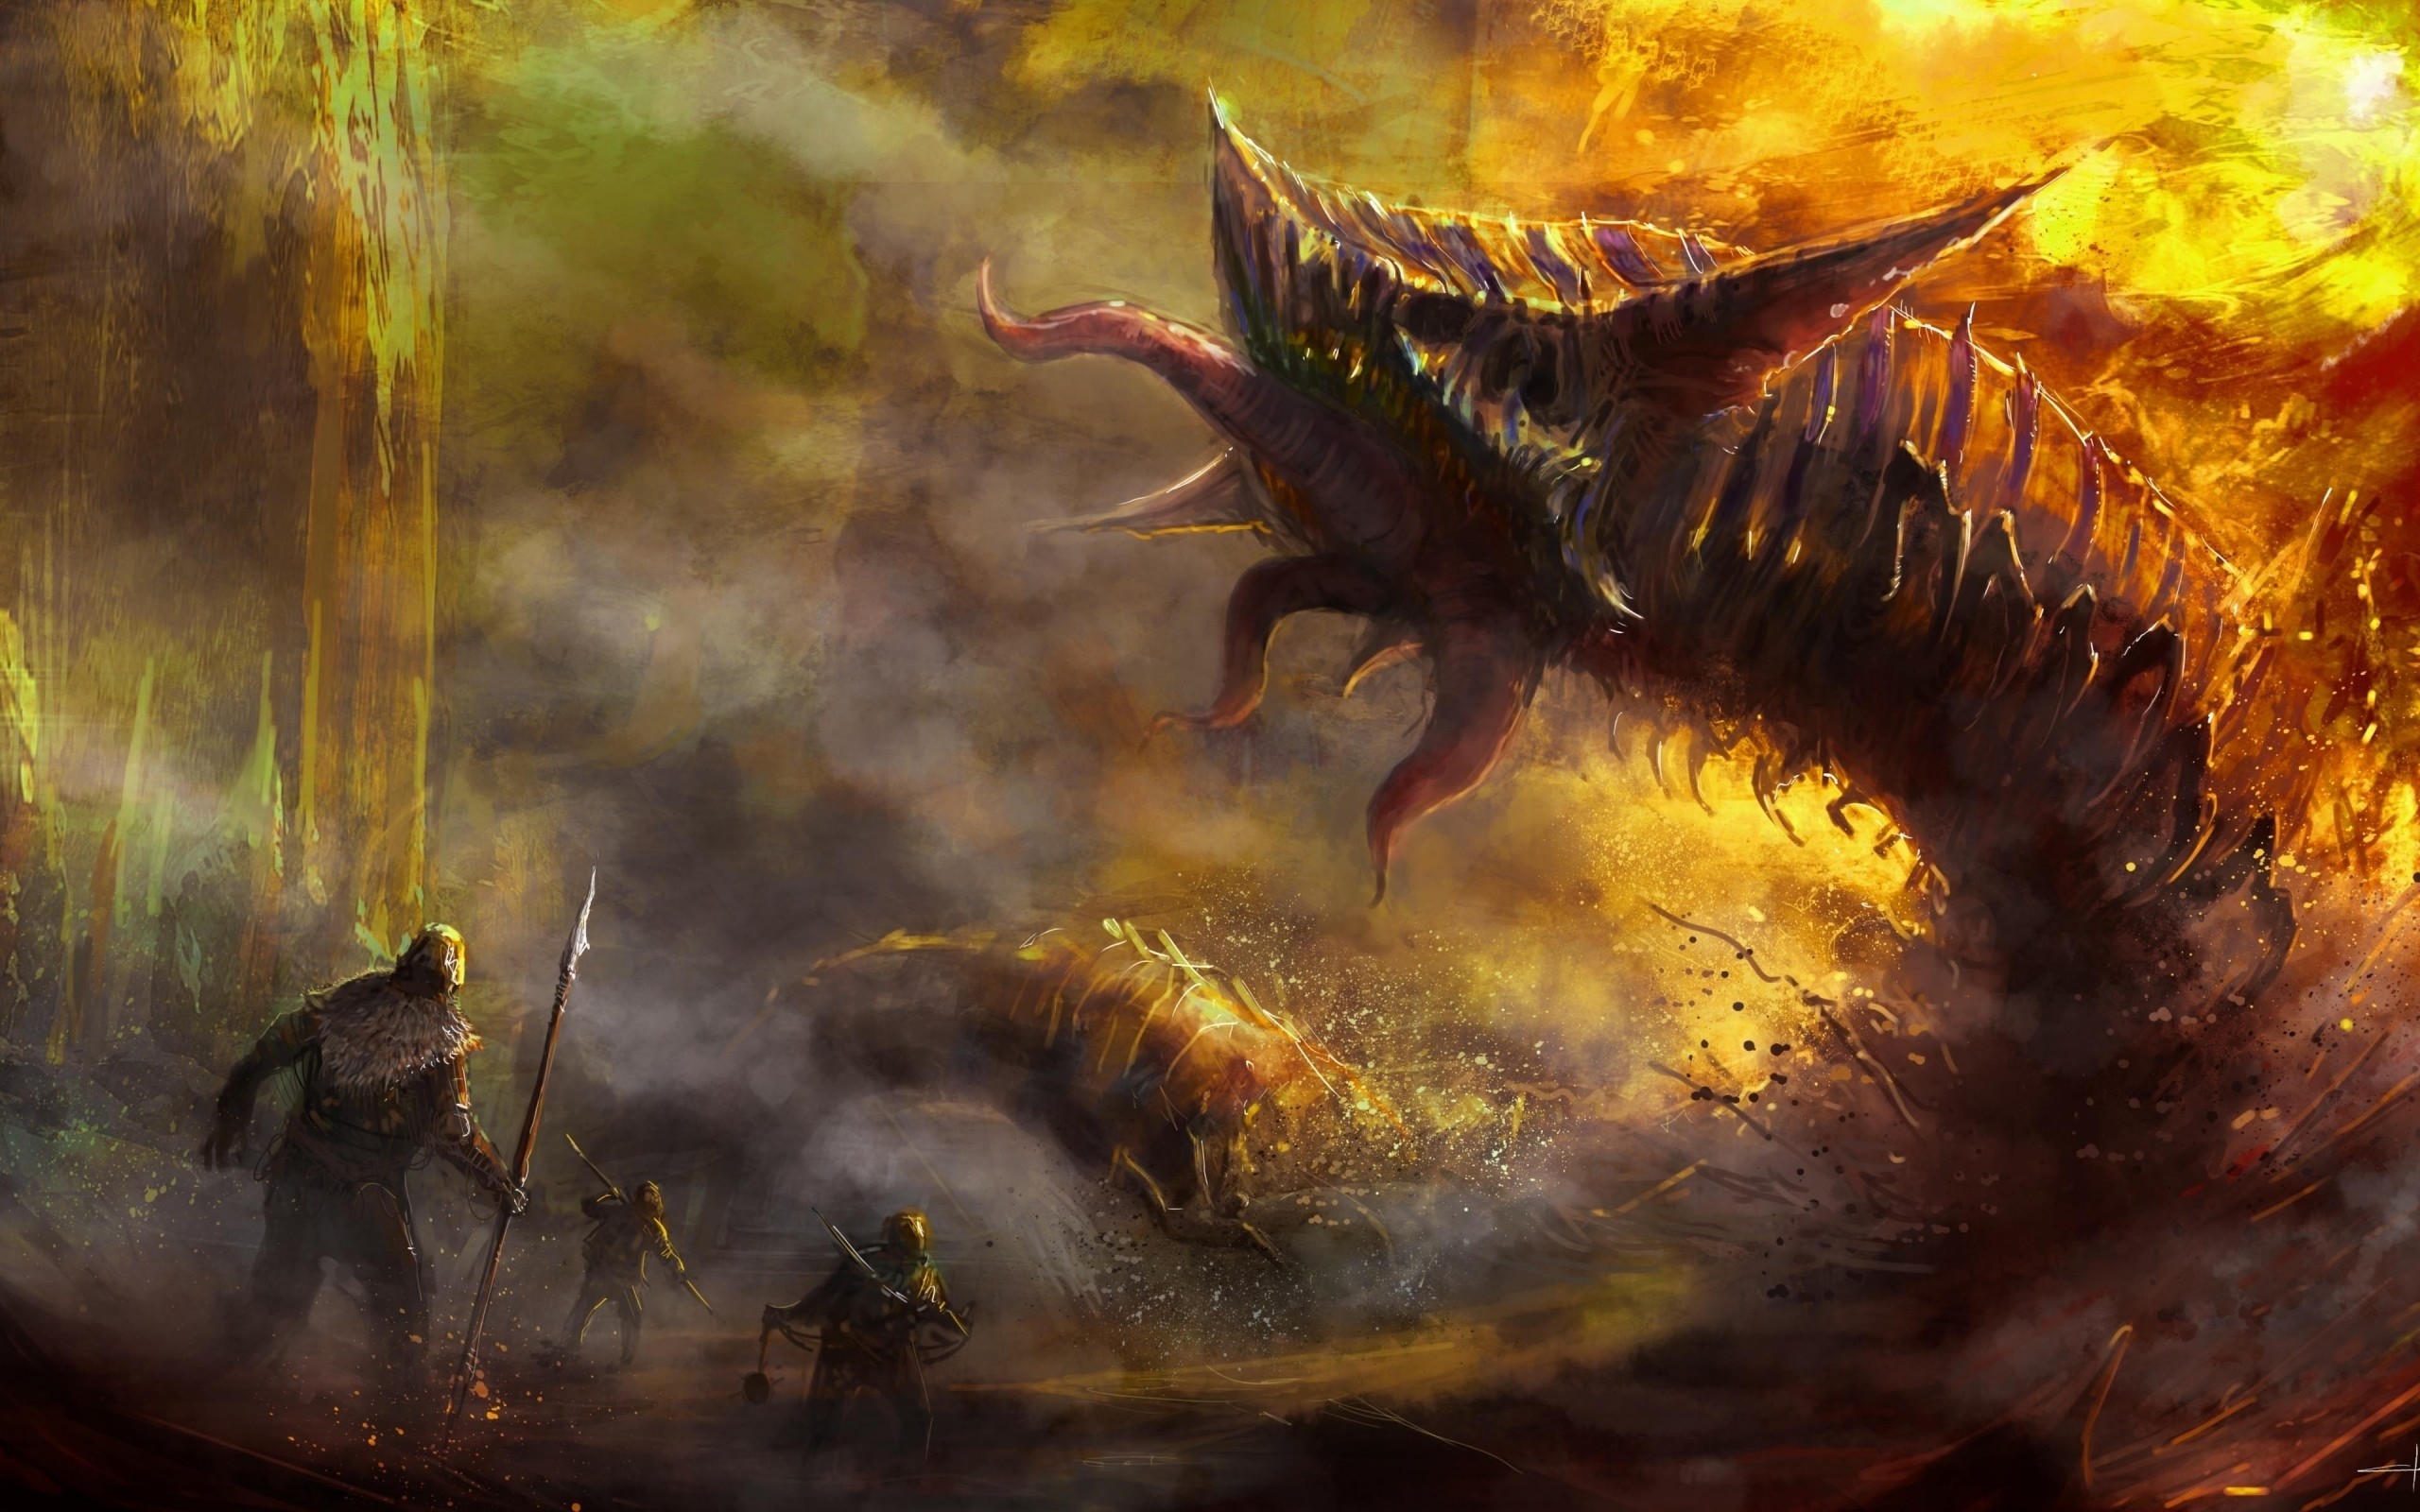 2560x1600 Title : 35 dungeons &amp; dragons hd wallpapers | background images –  wallpaper. Dimension : 2560 x 1600. File Type : JPG/JPEG